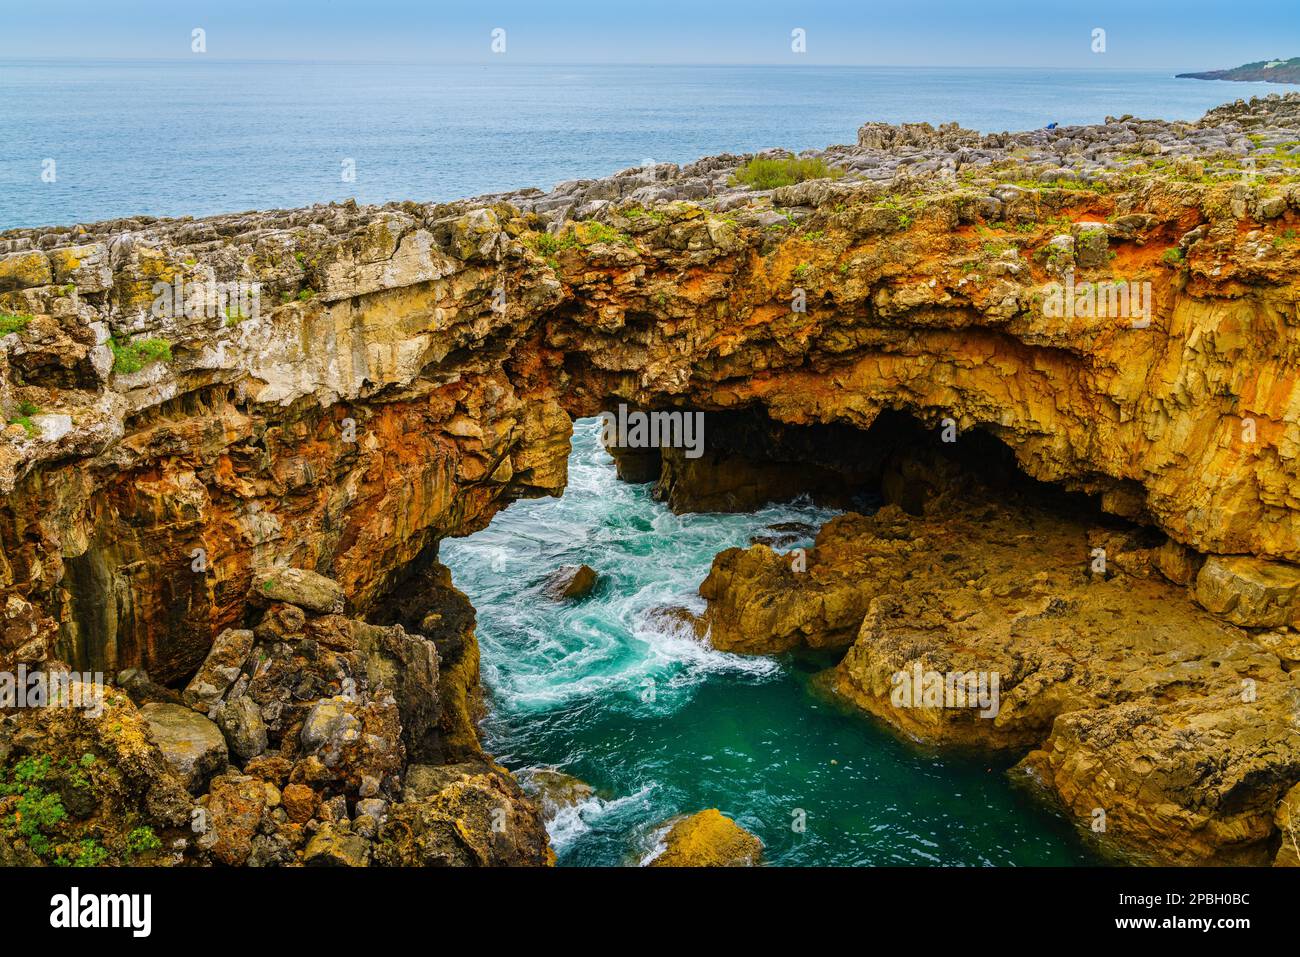 View of Boca do Inferno or Hell's Mouth - an open cavern in the coast of Cascais, Portugal Stock Photo